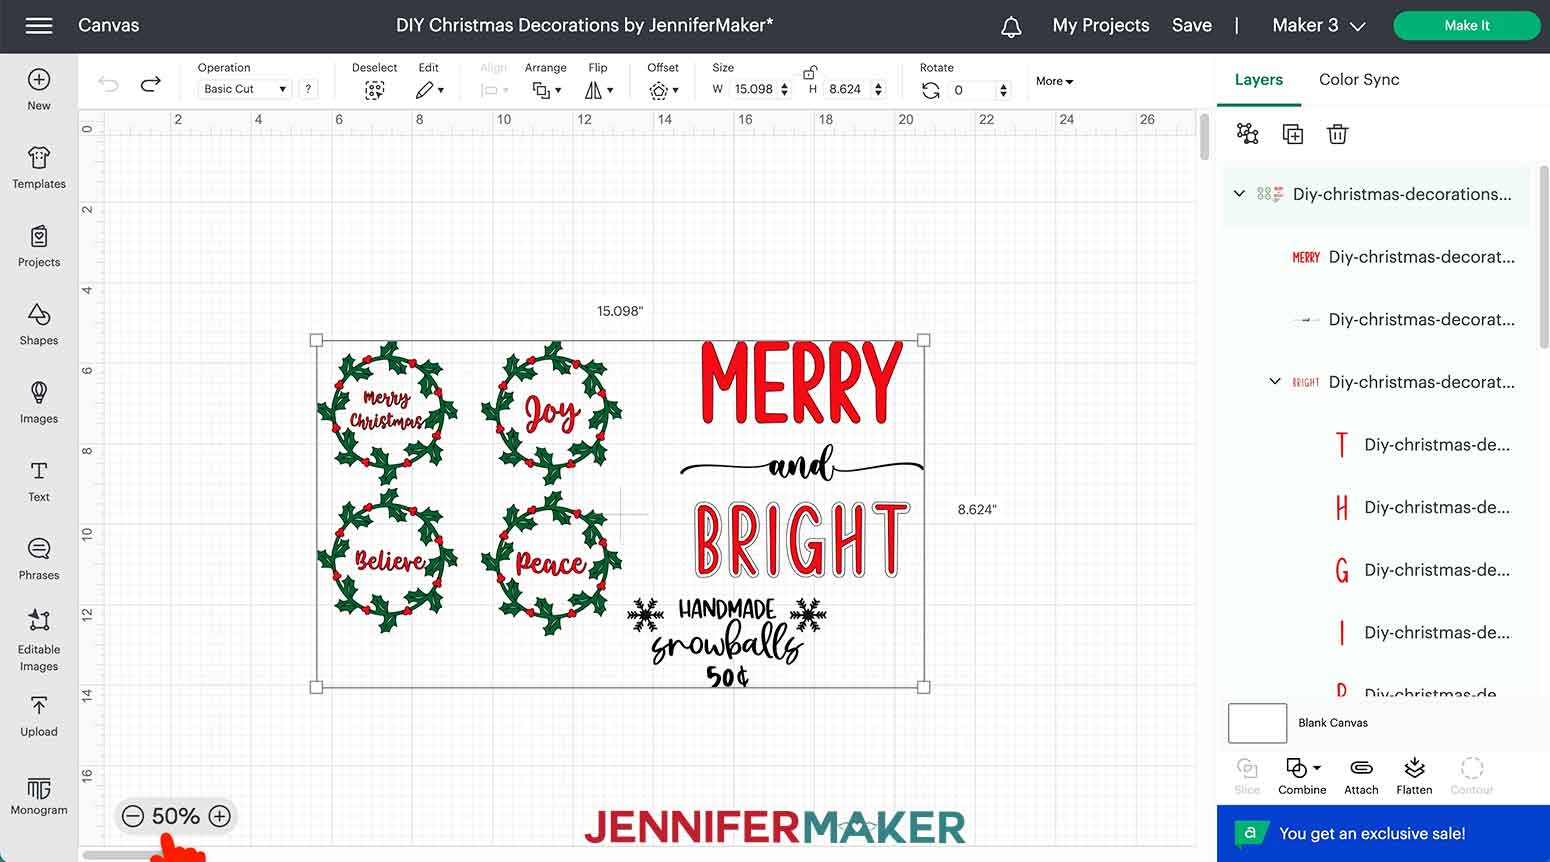 DIY Christmas Decorations SVG uploaded to Cricut Design Space canvas.